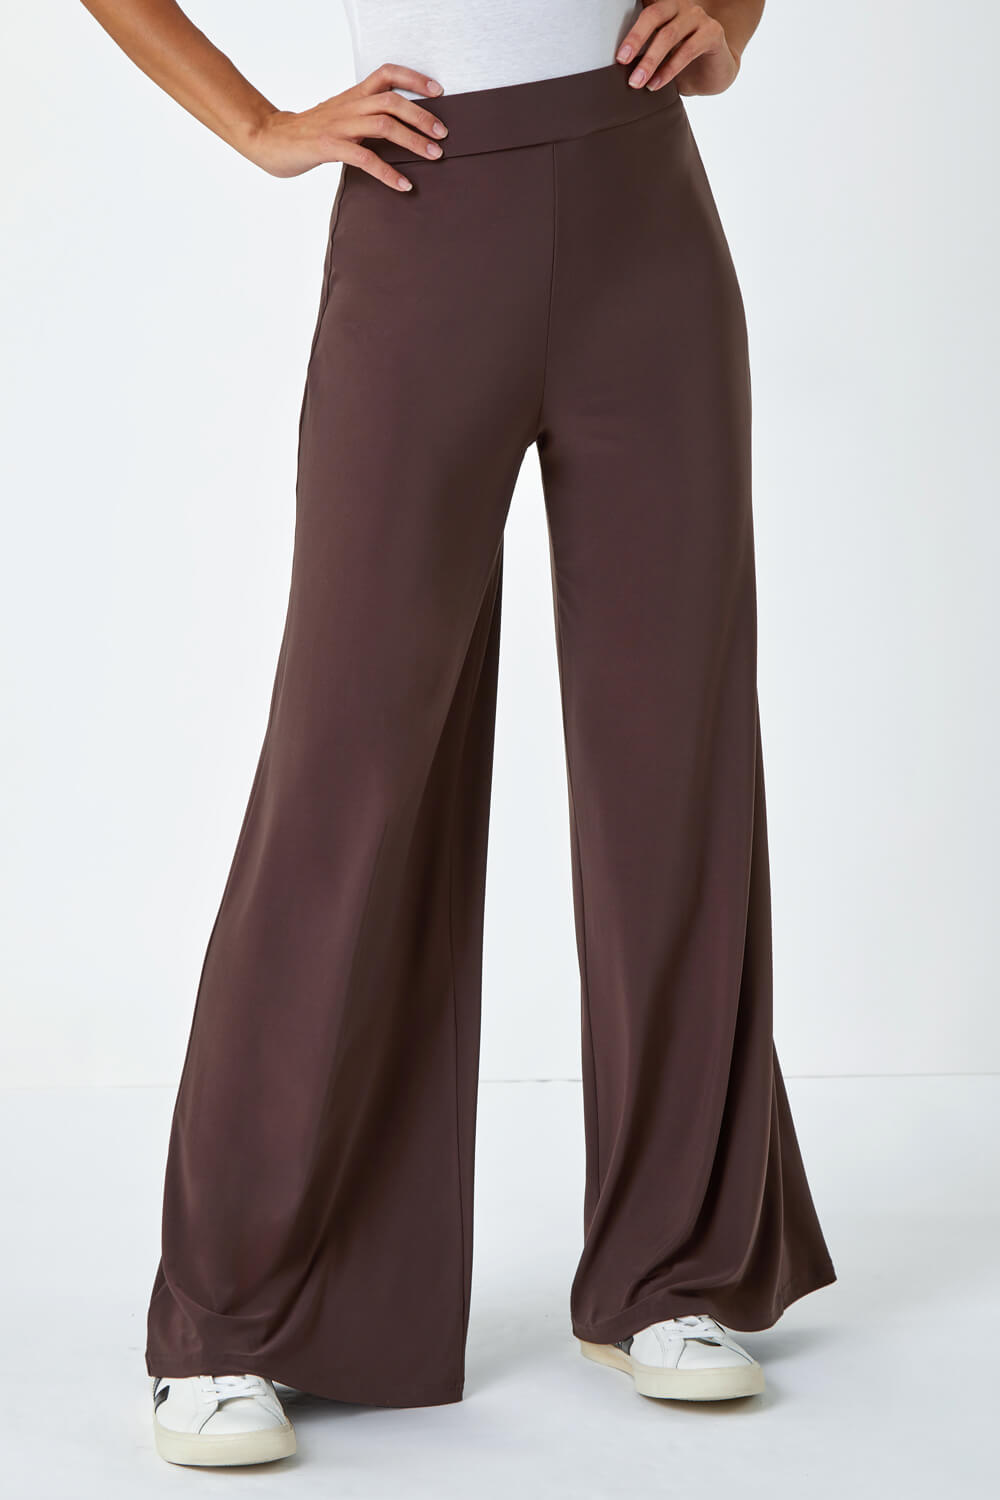 Chocolate Wide Leg Stretch Trousers, Image 4 of 5